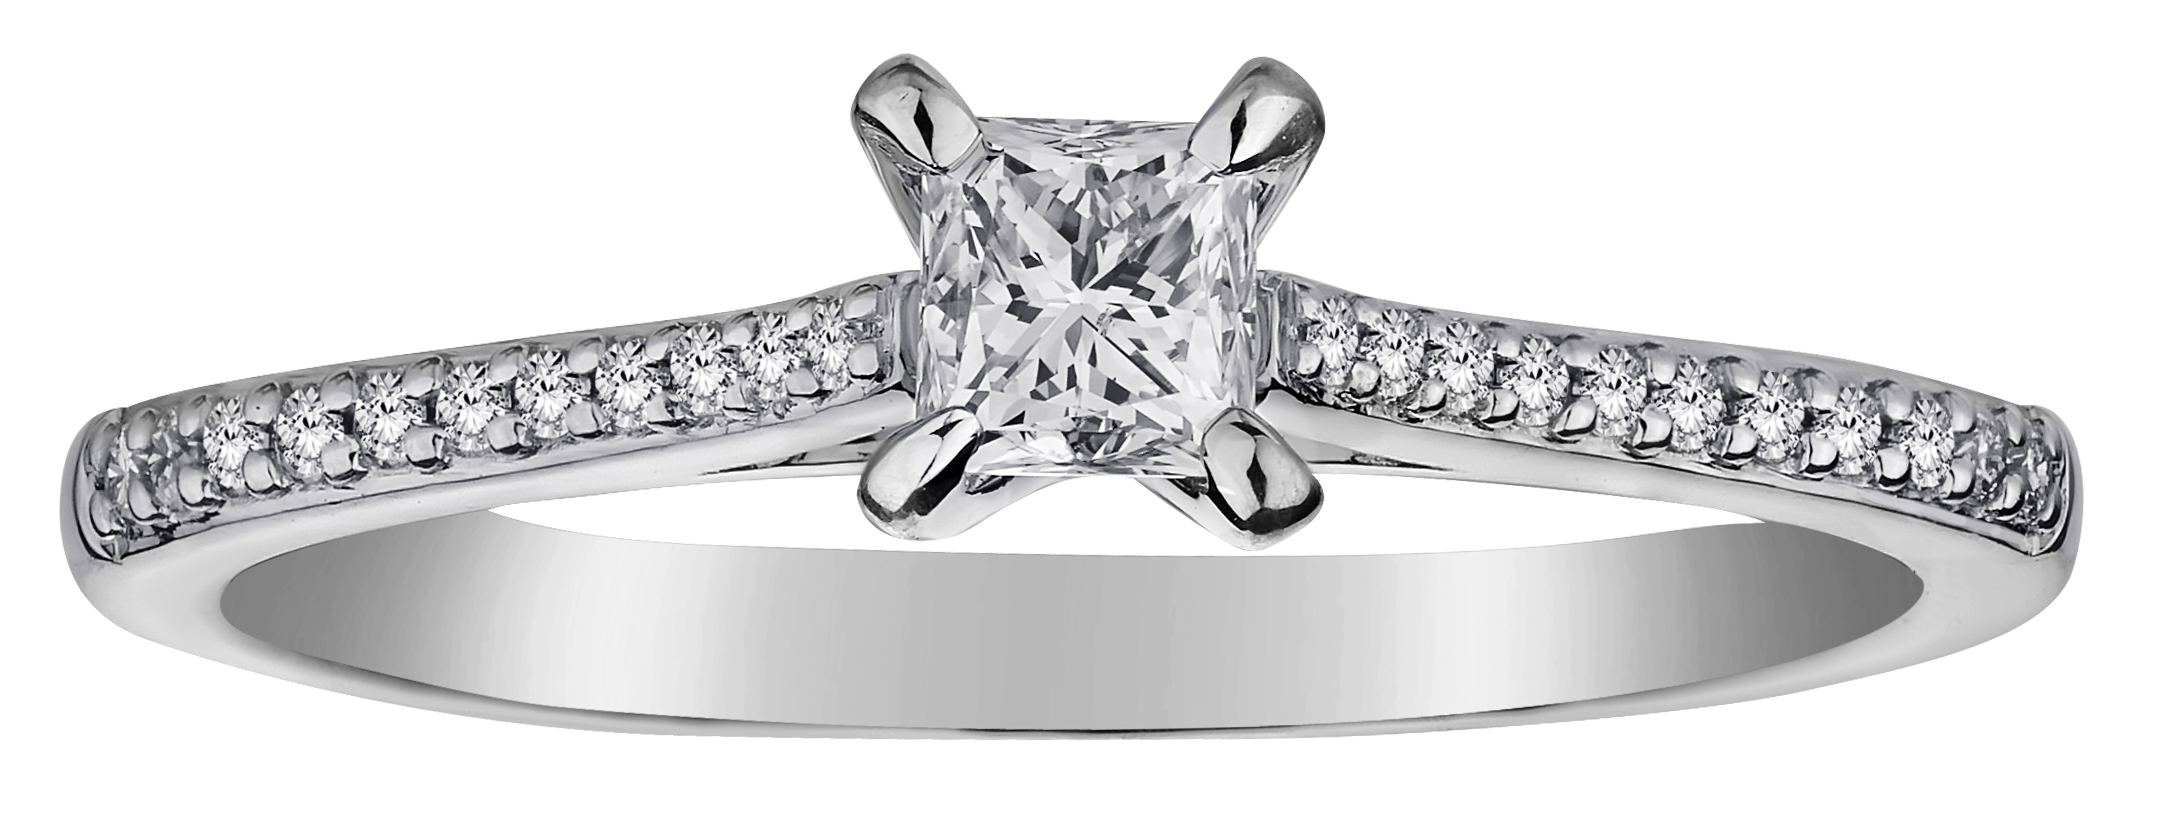 .65 Carat of Canadian Diamonds "Princess" Engagement Ring, 10kt White Gold.....................NOW